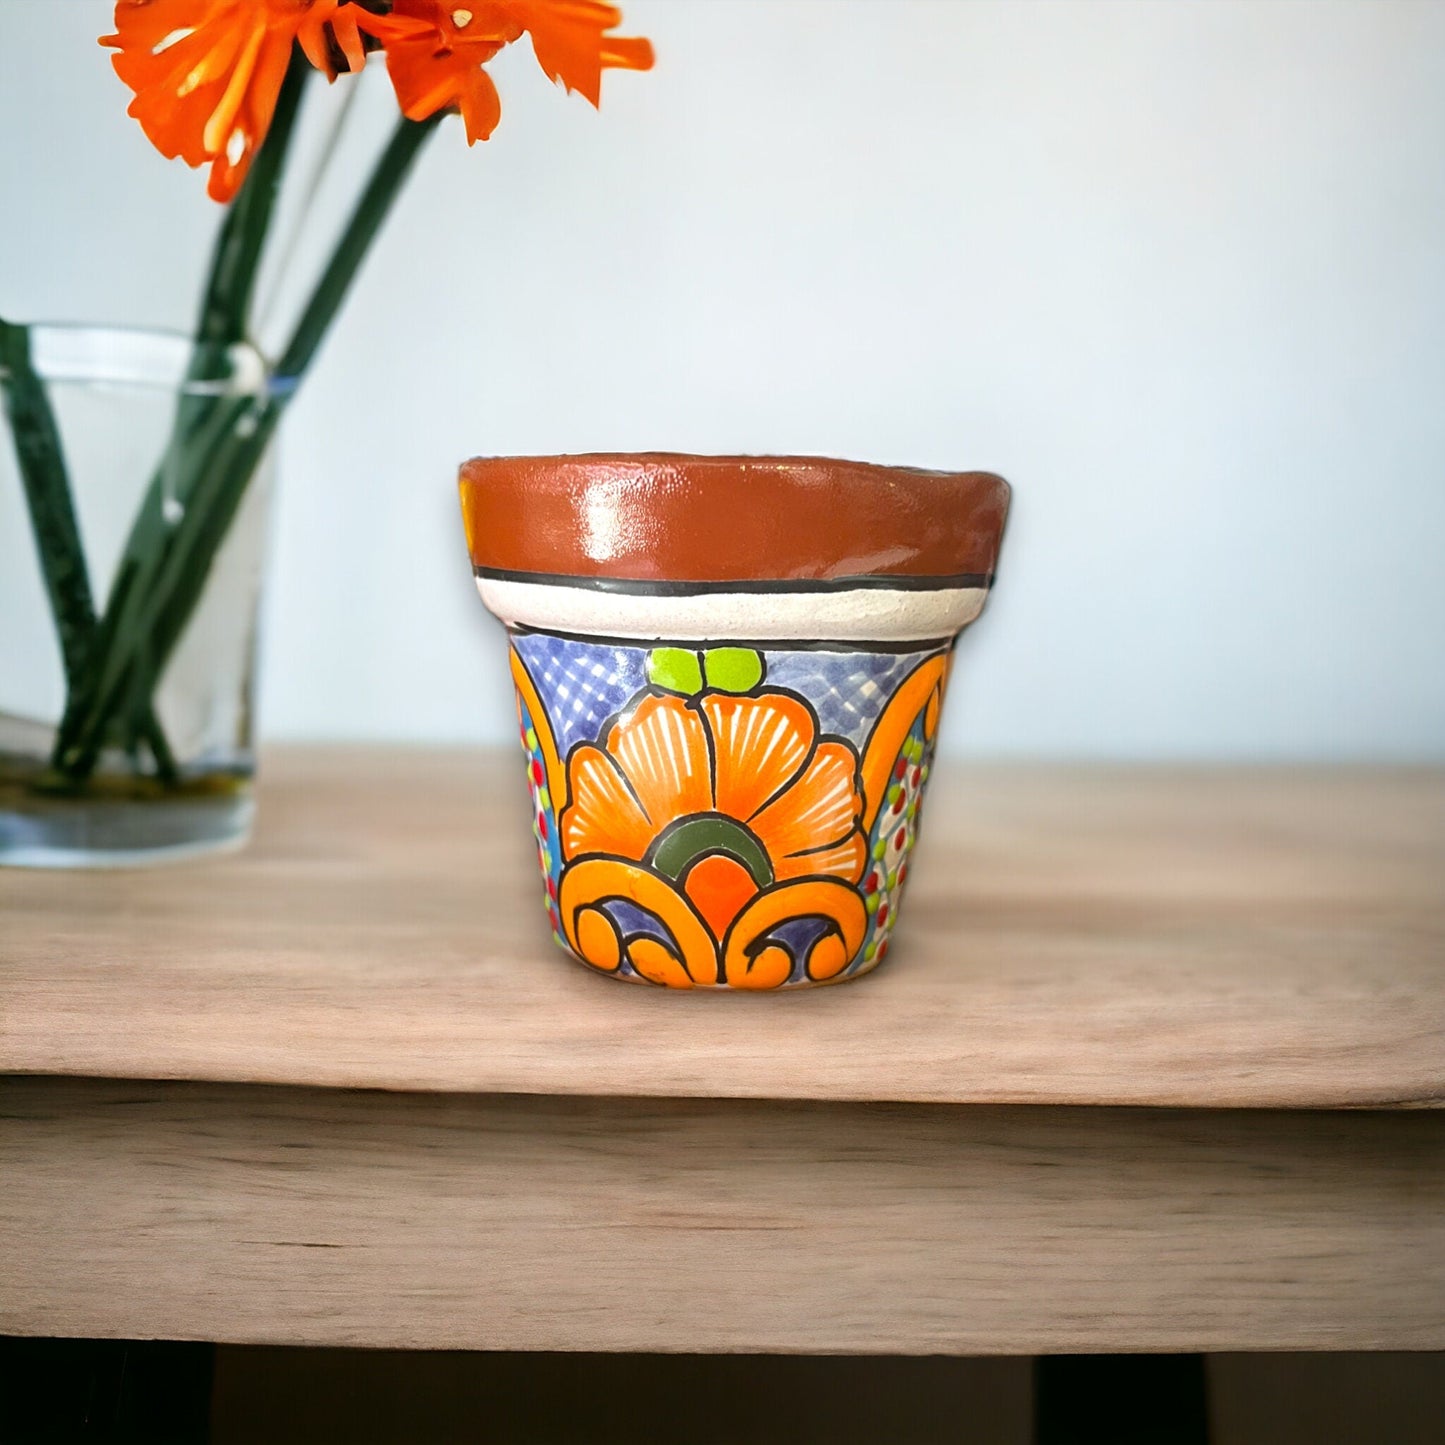 Set of 3 Colorful Talavera Flower Pot Set | Hand-Painted Mexican Planters